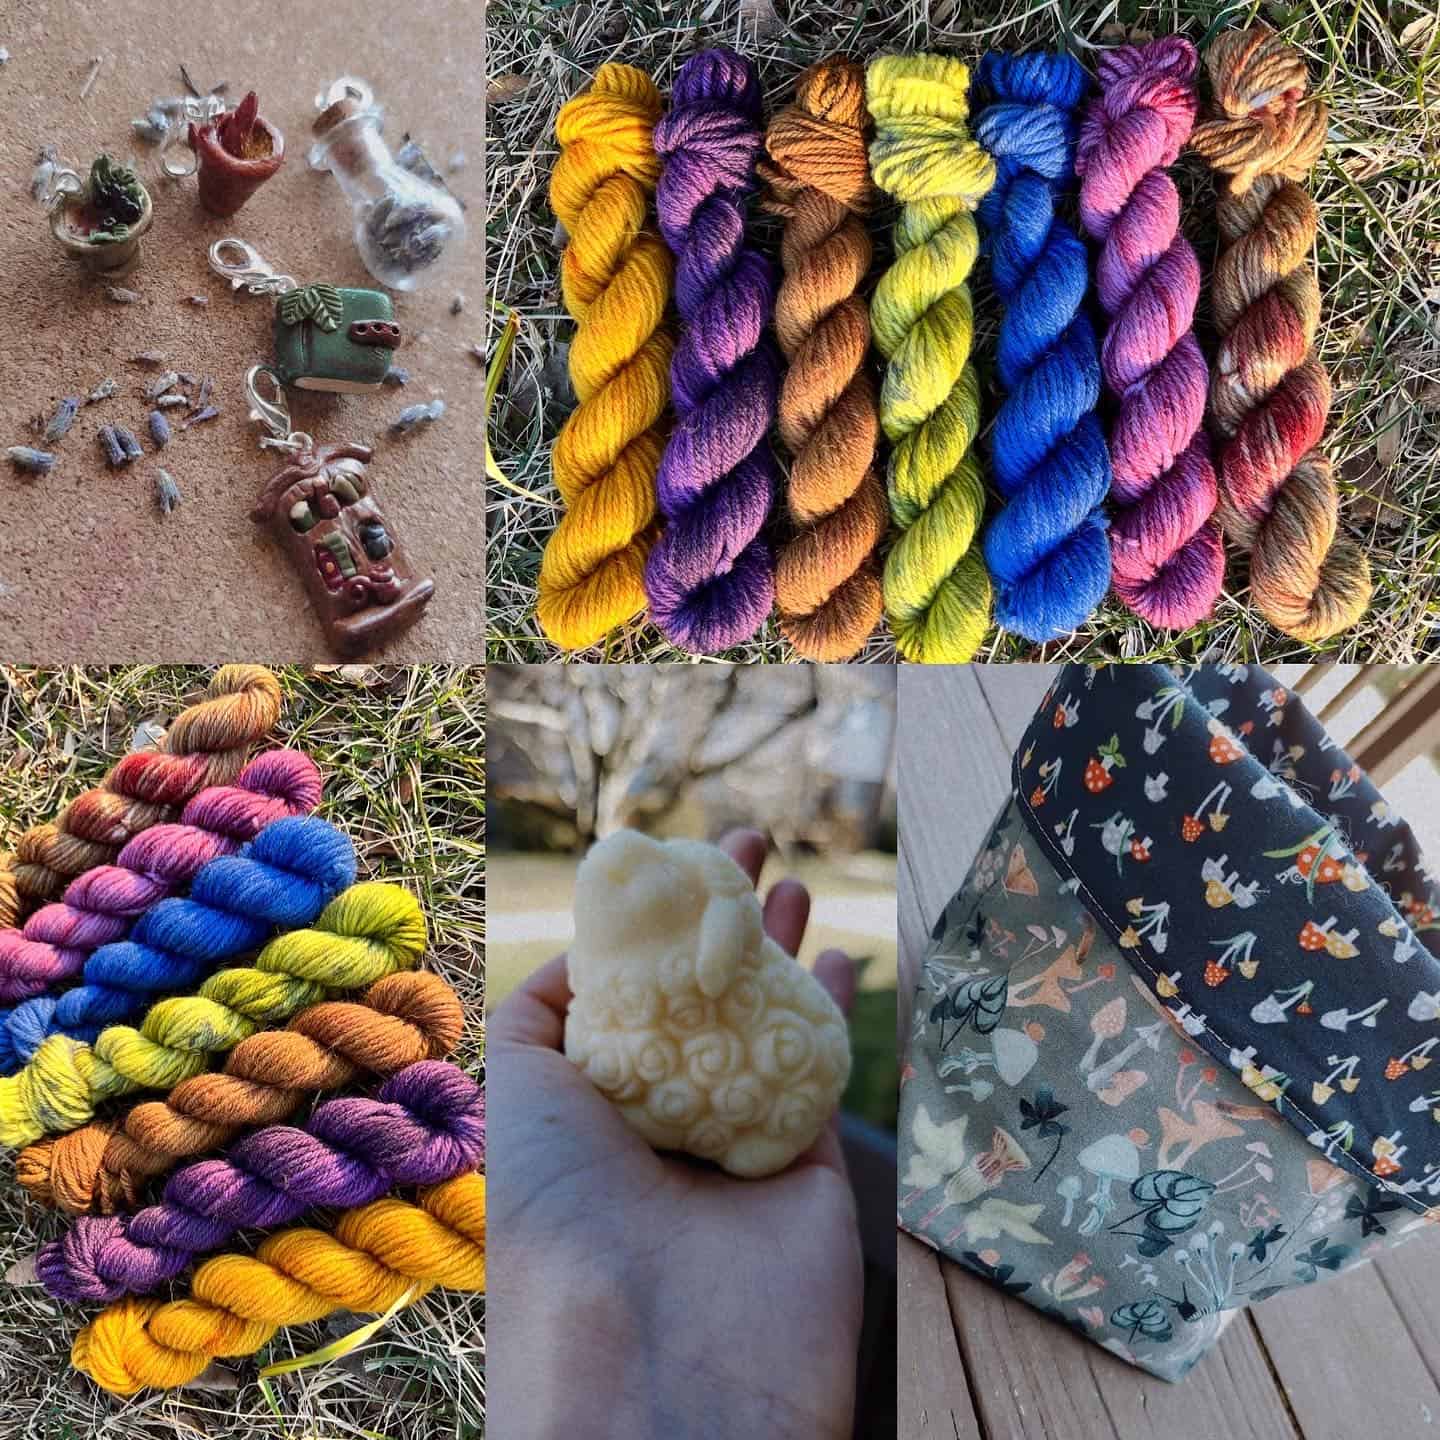 What to stash this week: A yarny assortment